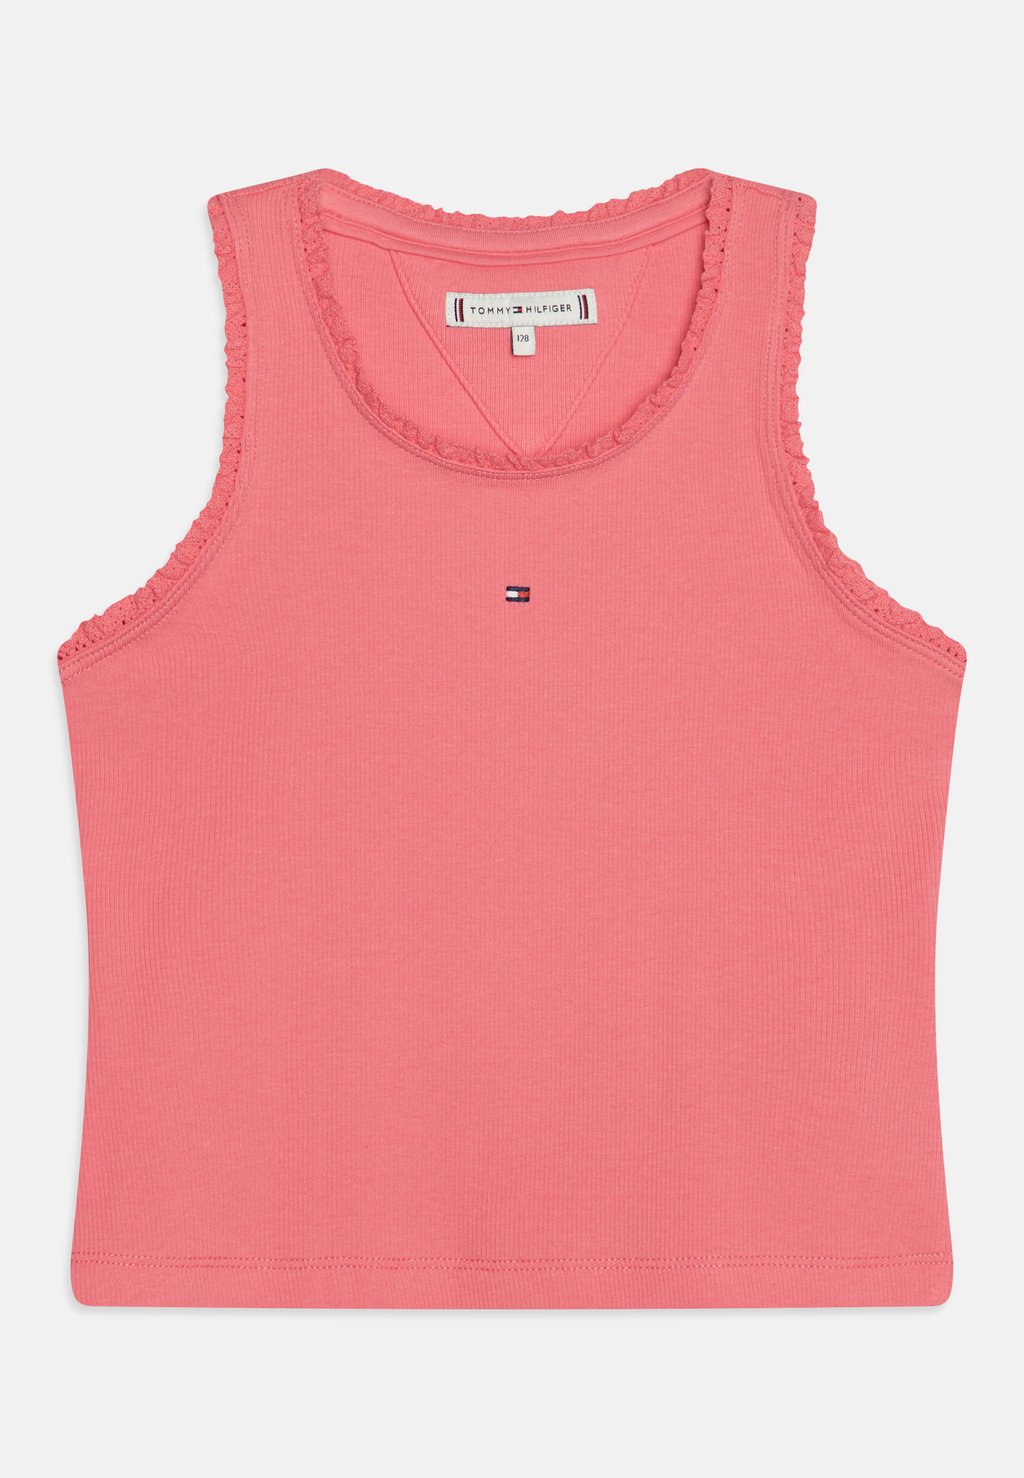 Топ Essential Lace Tank Tommy Hilfiger, цвет glamour pink